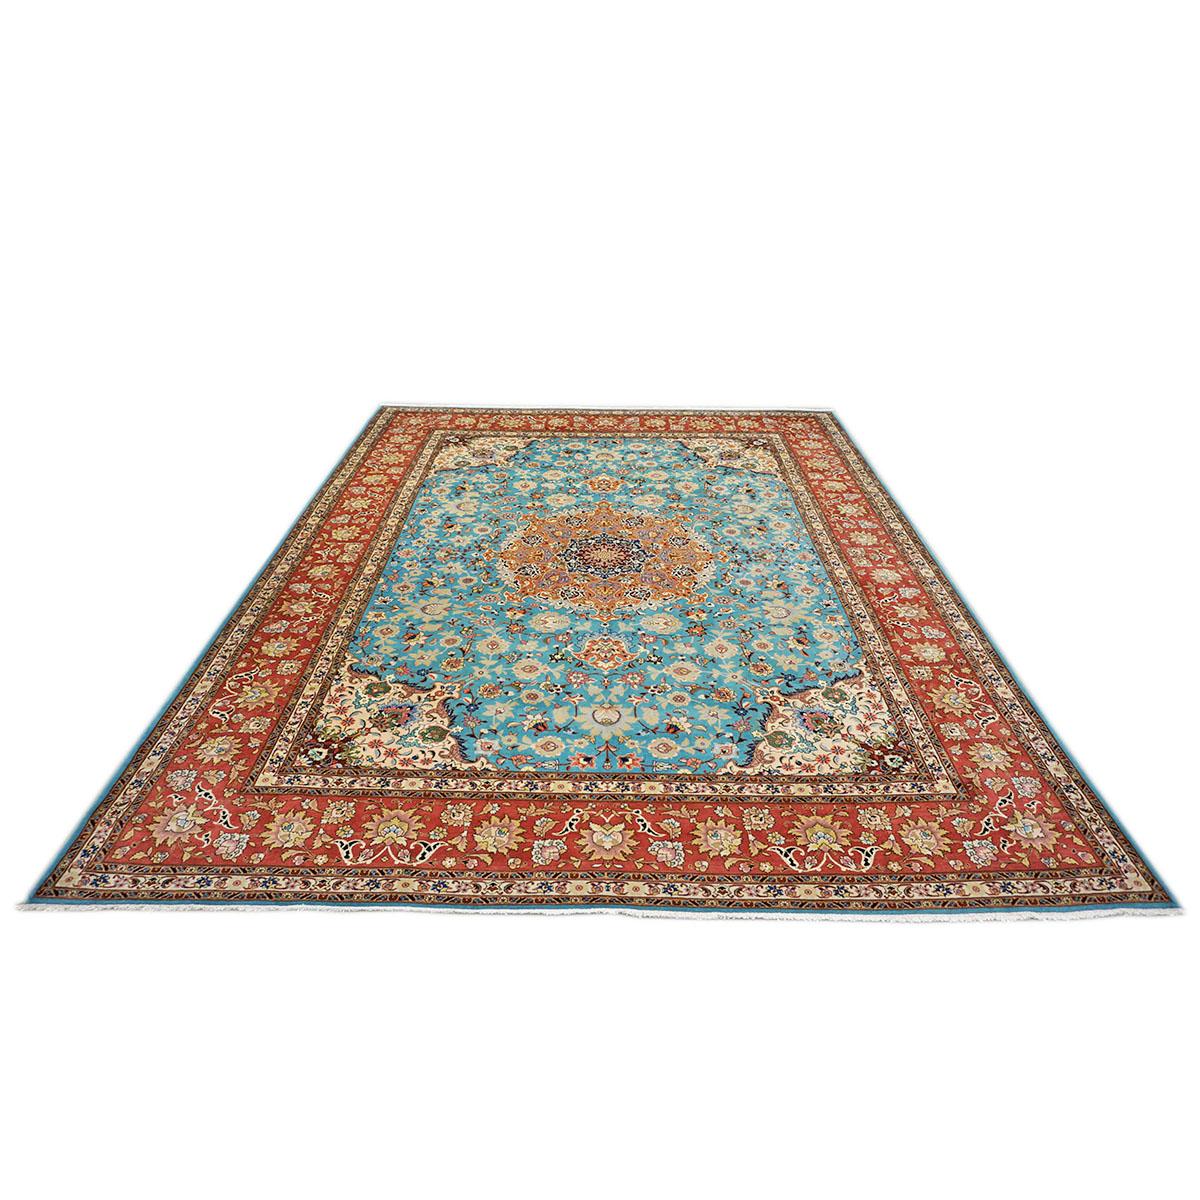 Antique Persian Tabriz Emad 9x12 Light Blue, Red, & Ivory Handmade Area Rug In Good Condition For Sale In Houston, TX